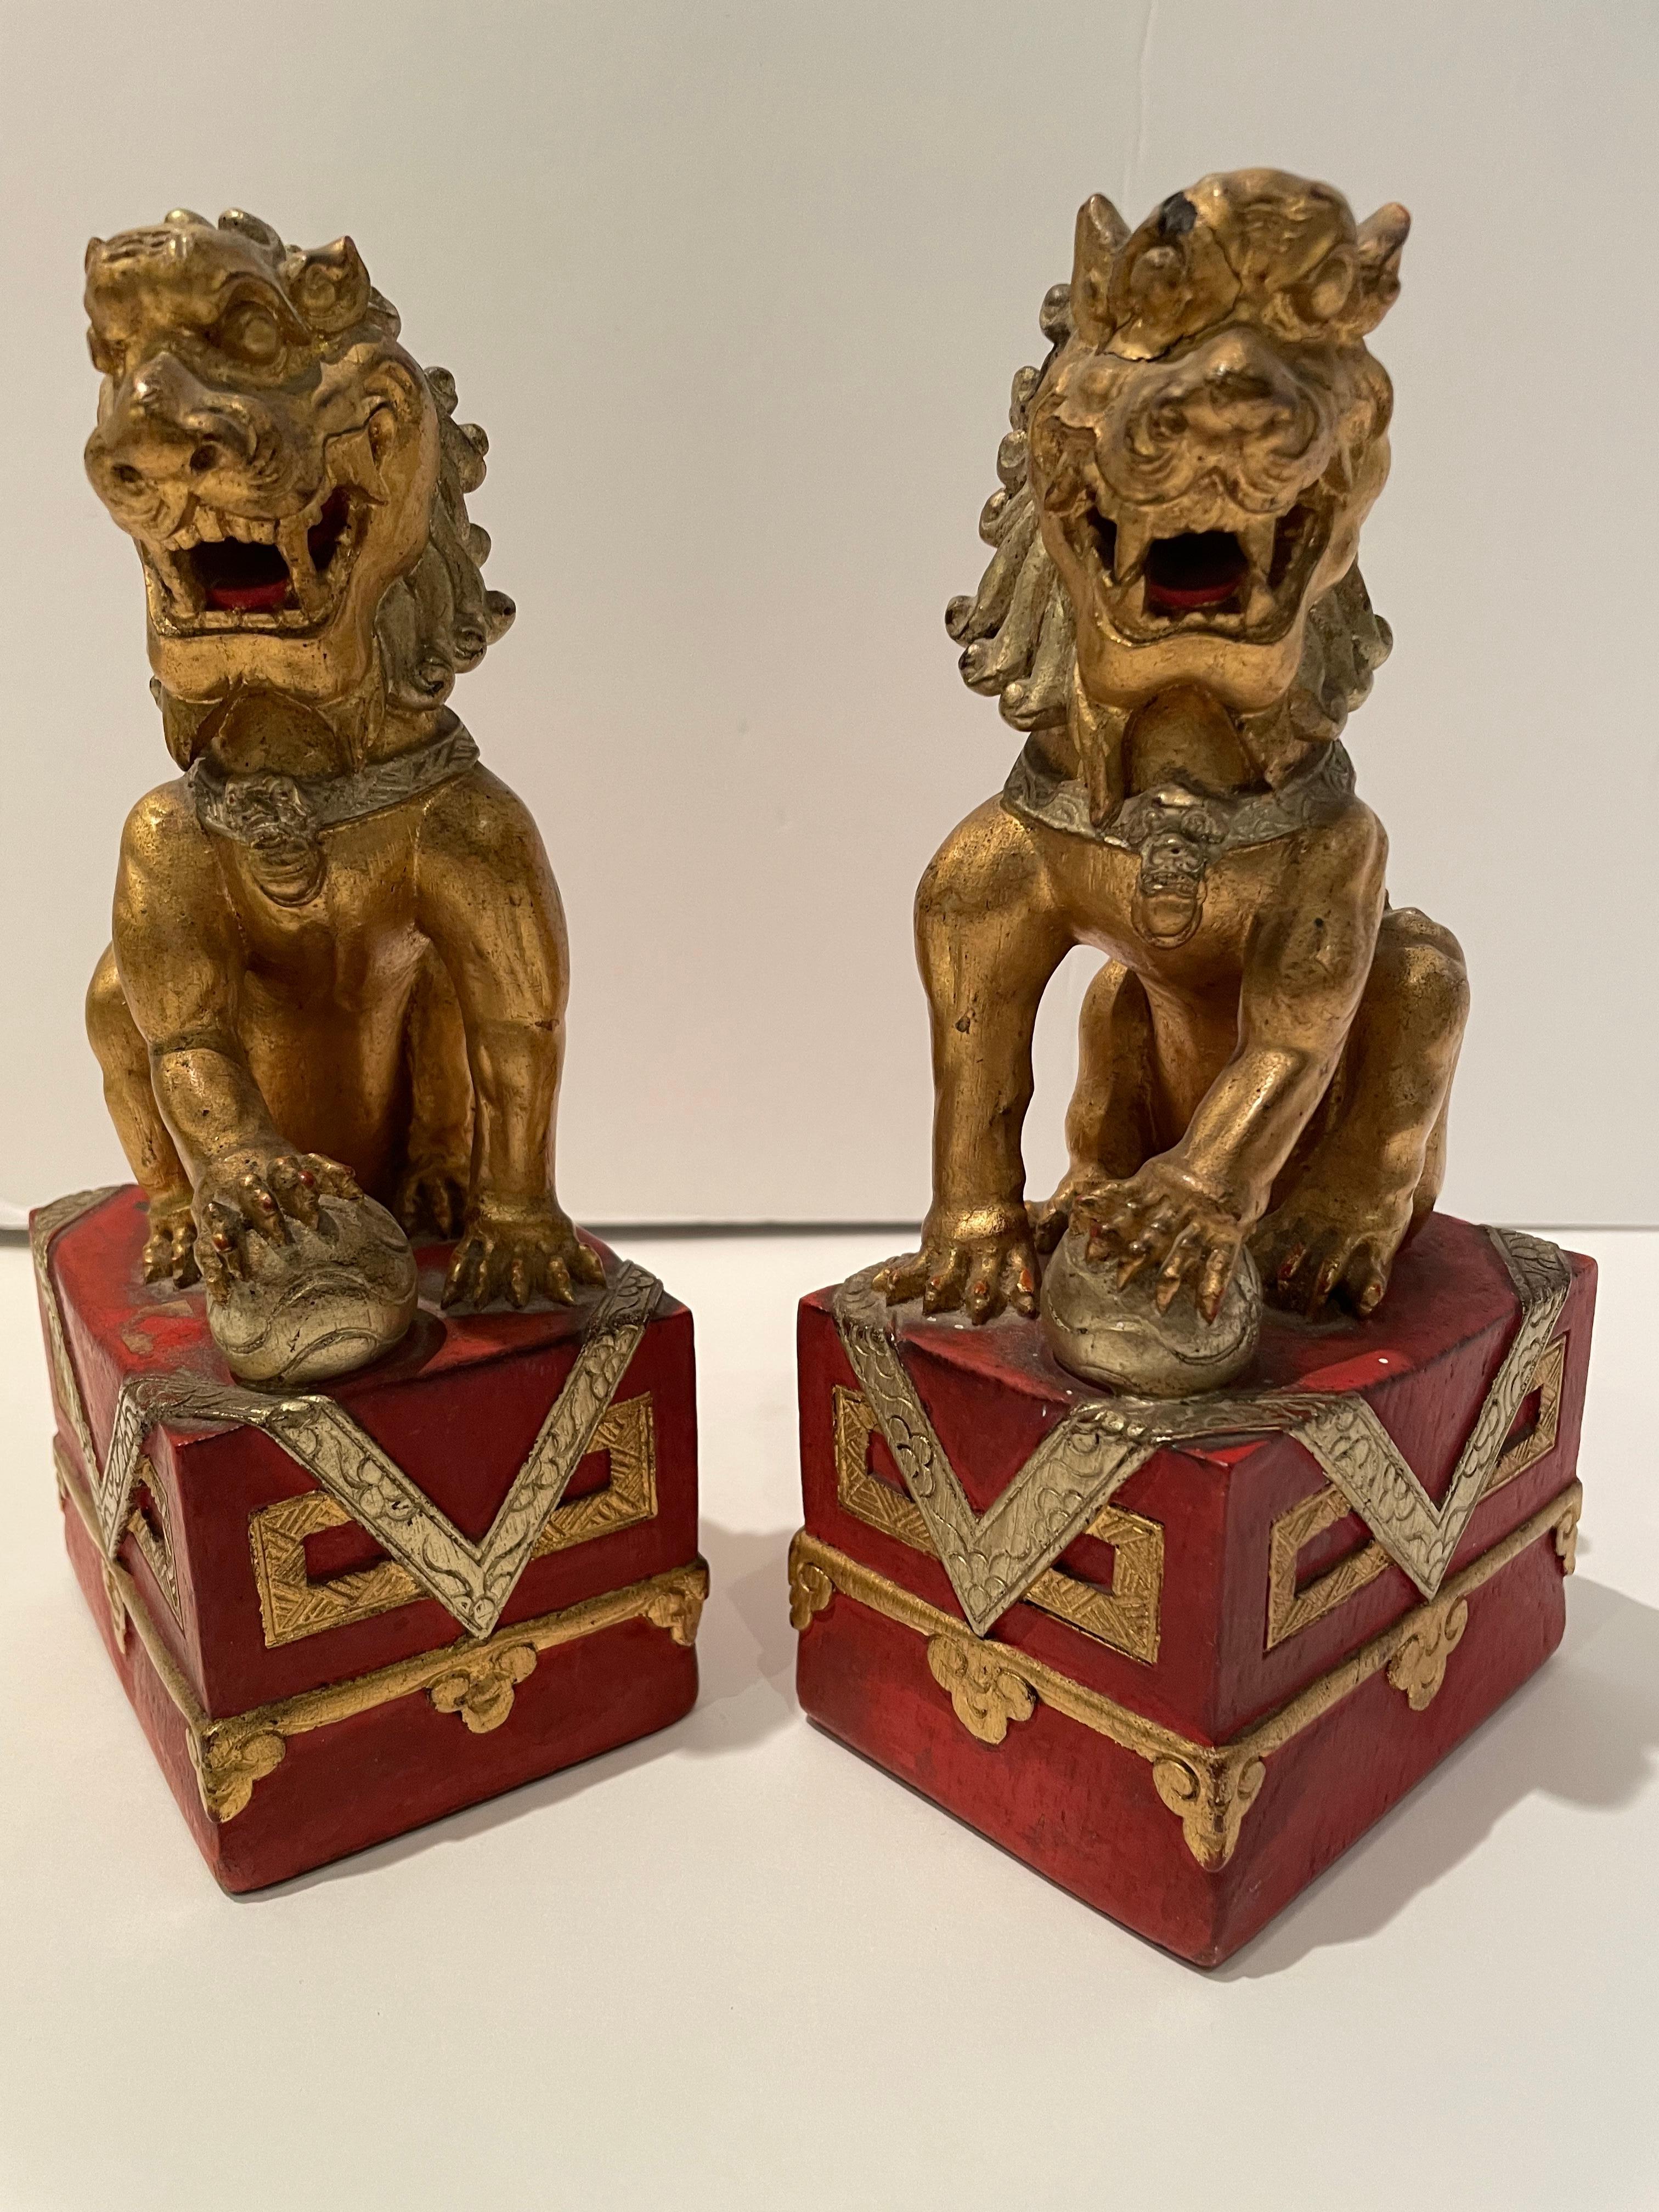 Regal pair of carved wooden Chinese red painted and gilt Buddhistic lions. Each lion is seated atop a cloth draped plinth, with one paw atop a brocade ball. The lion is a symbol of strength and protection. The lion is the protector of the Buddha and